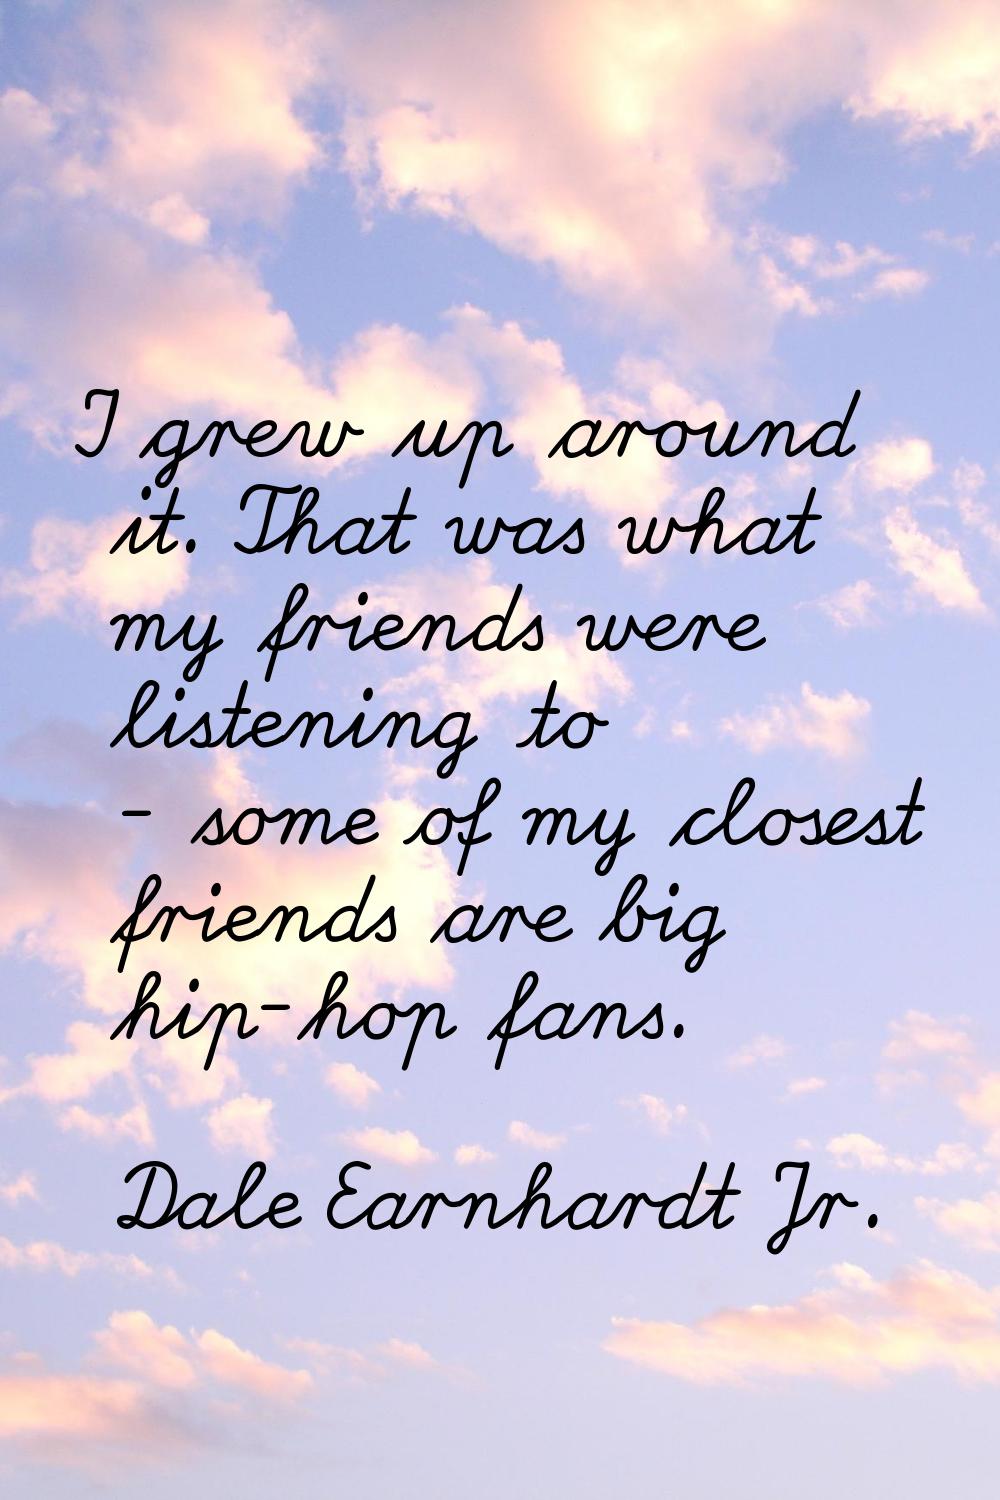 I grew up around it. That was what my friends were listening to - some of my closest friends are bi